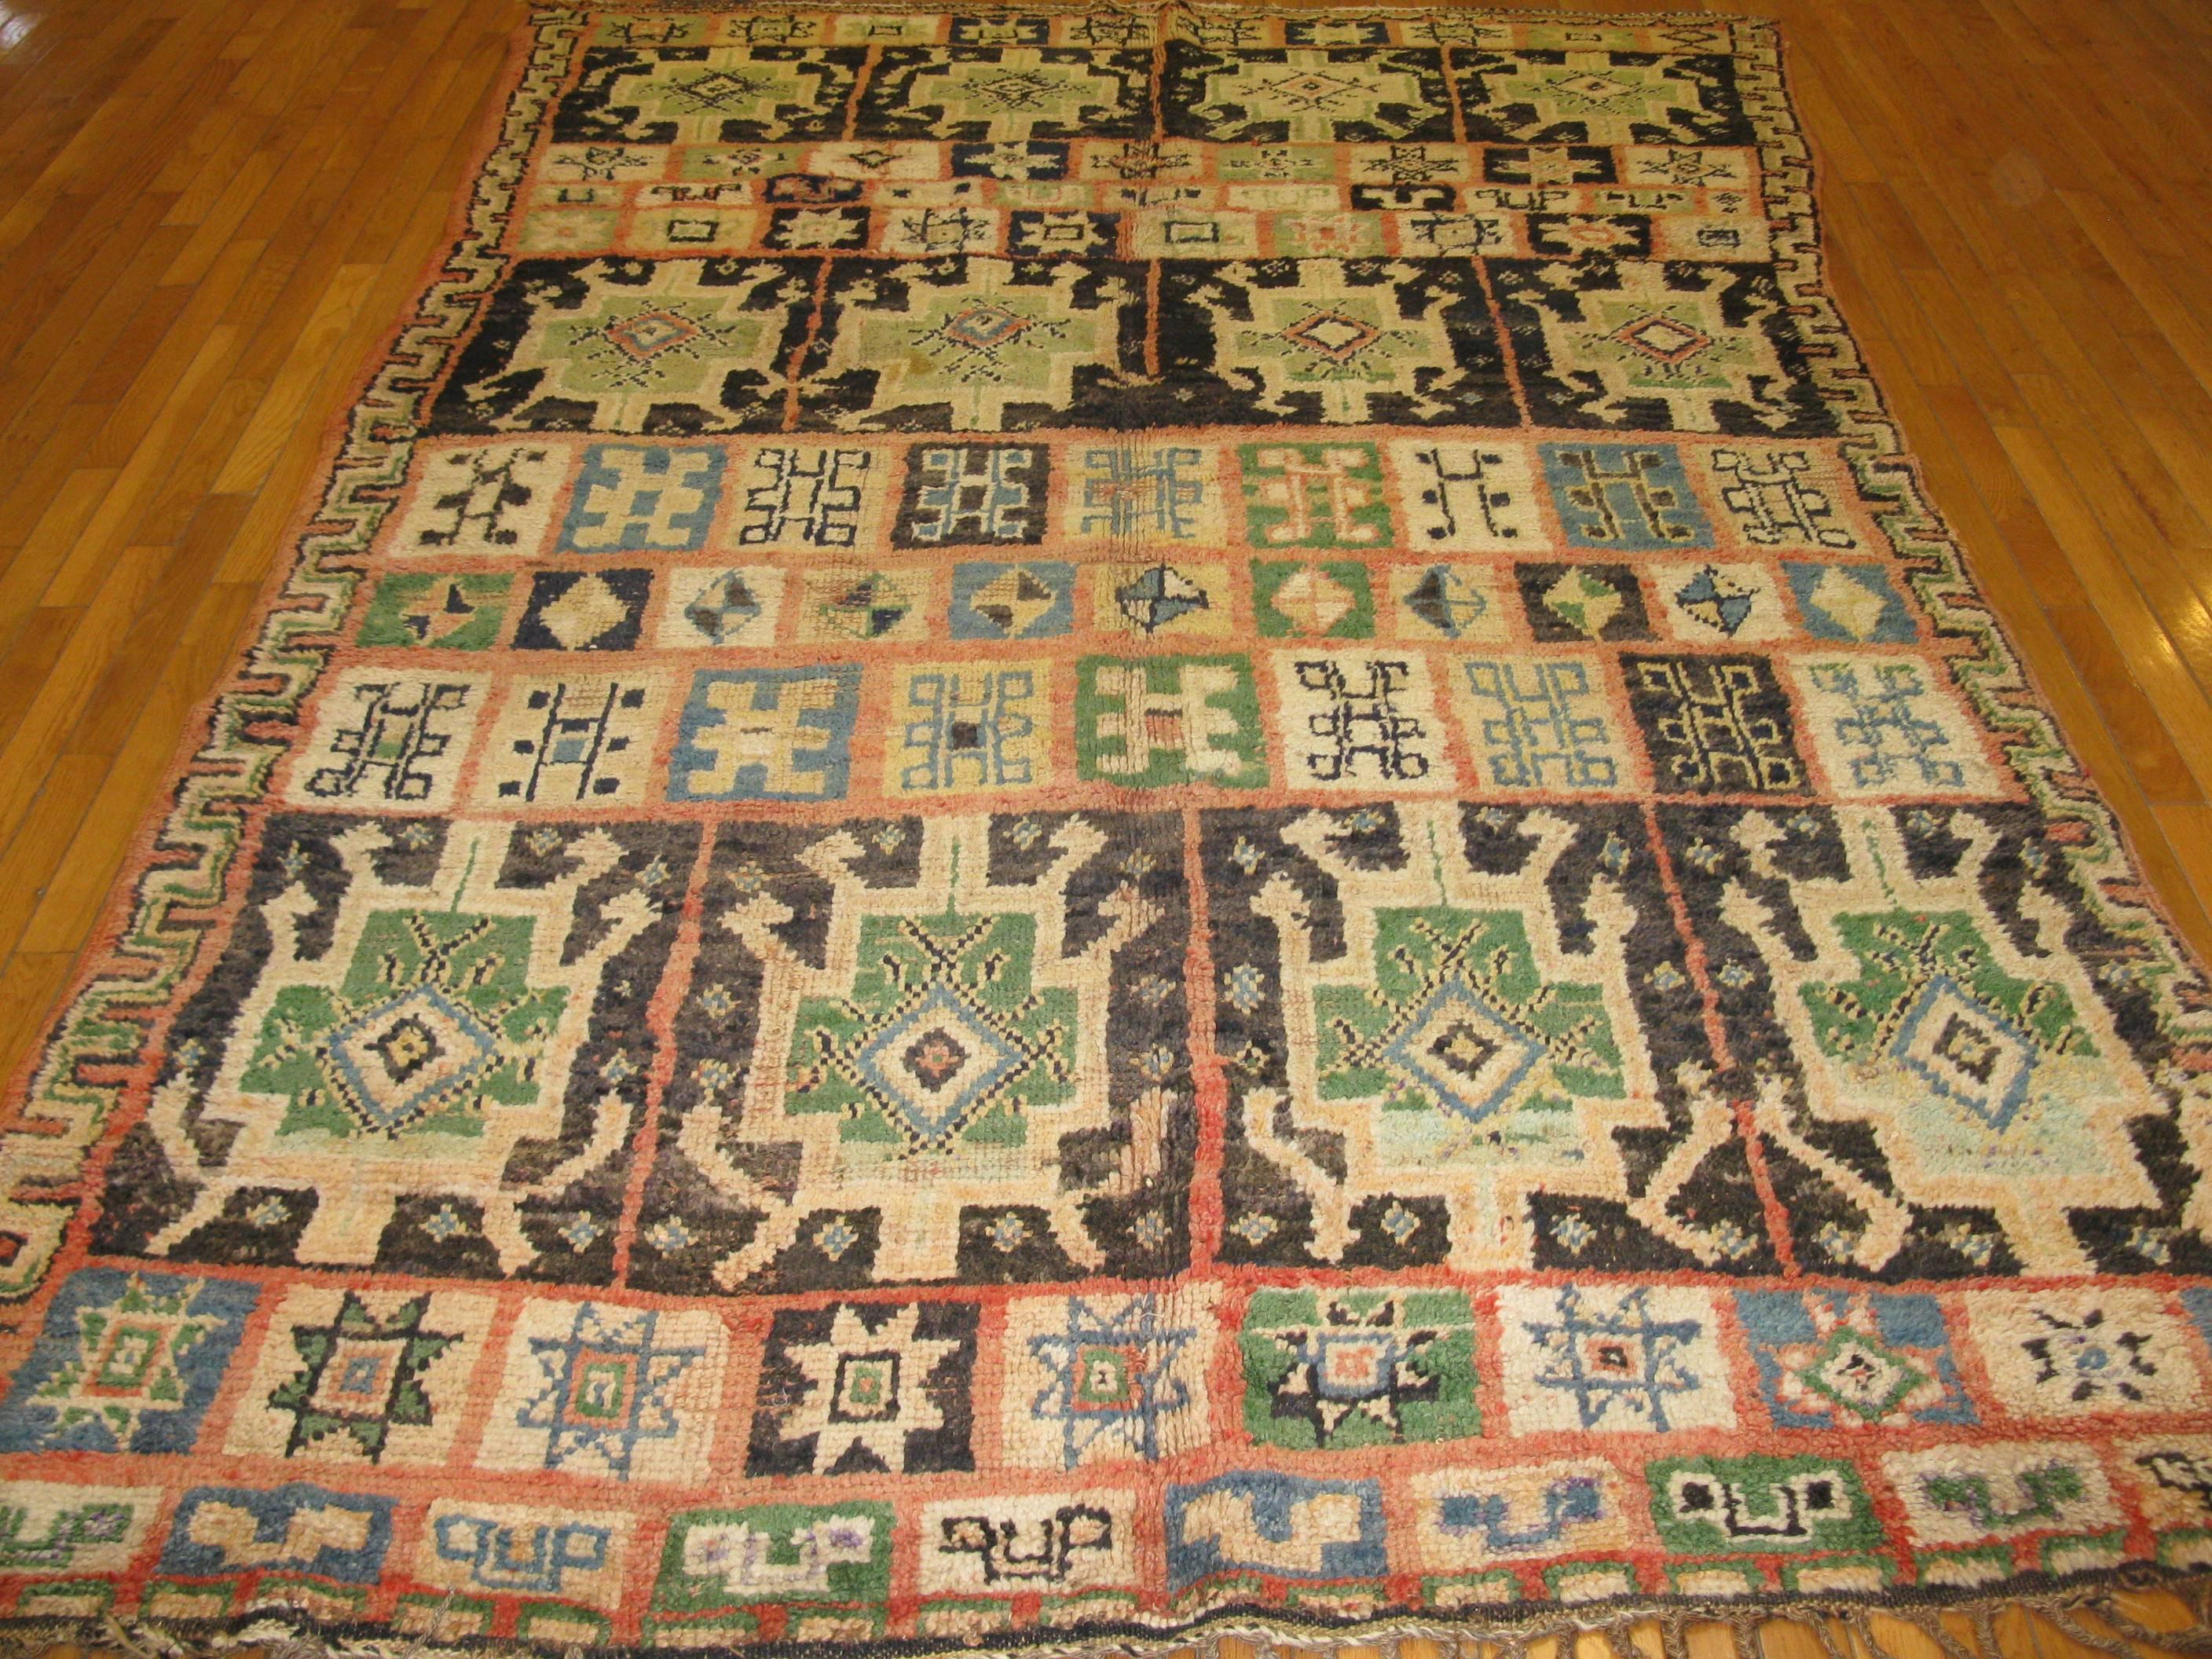 This is a tribal hand-knotted rug from Morocco. It is made with all wool and natural dyes. The rug is in great condition and measures 5' 10'' x 8' 11''.